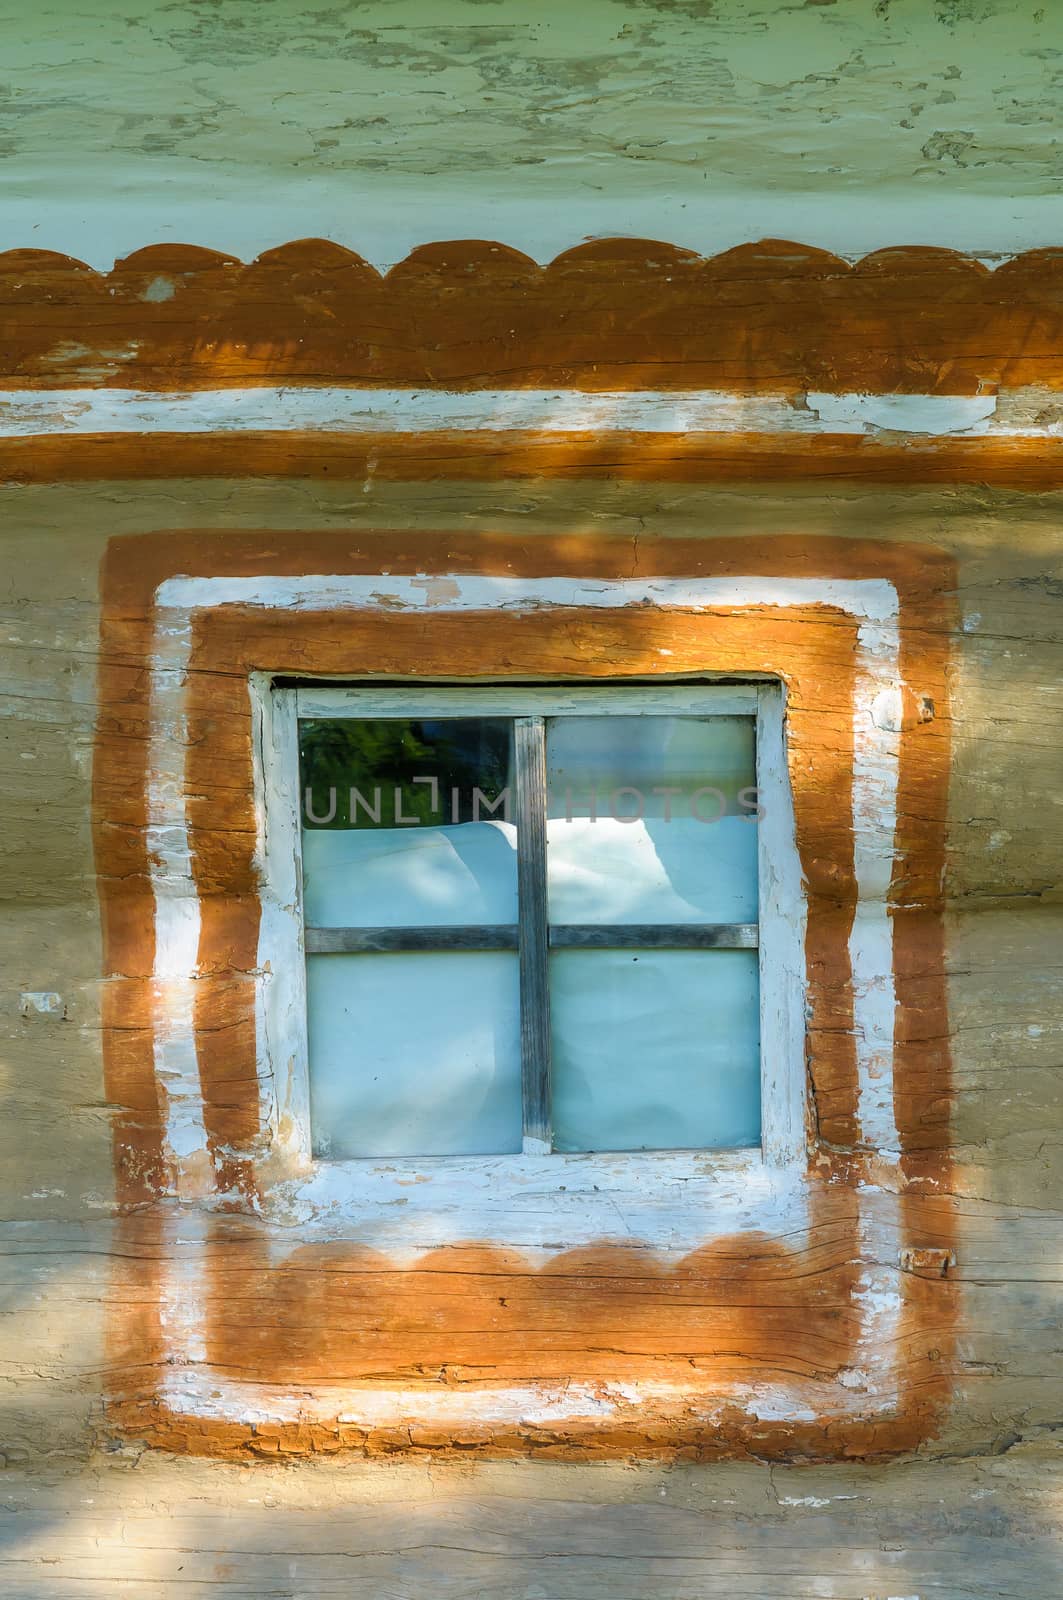 Detail of a window of a typical ukrainian antique house, in Pirogovo near Kiev